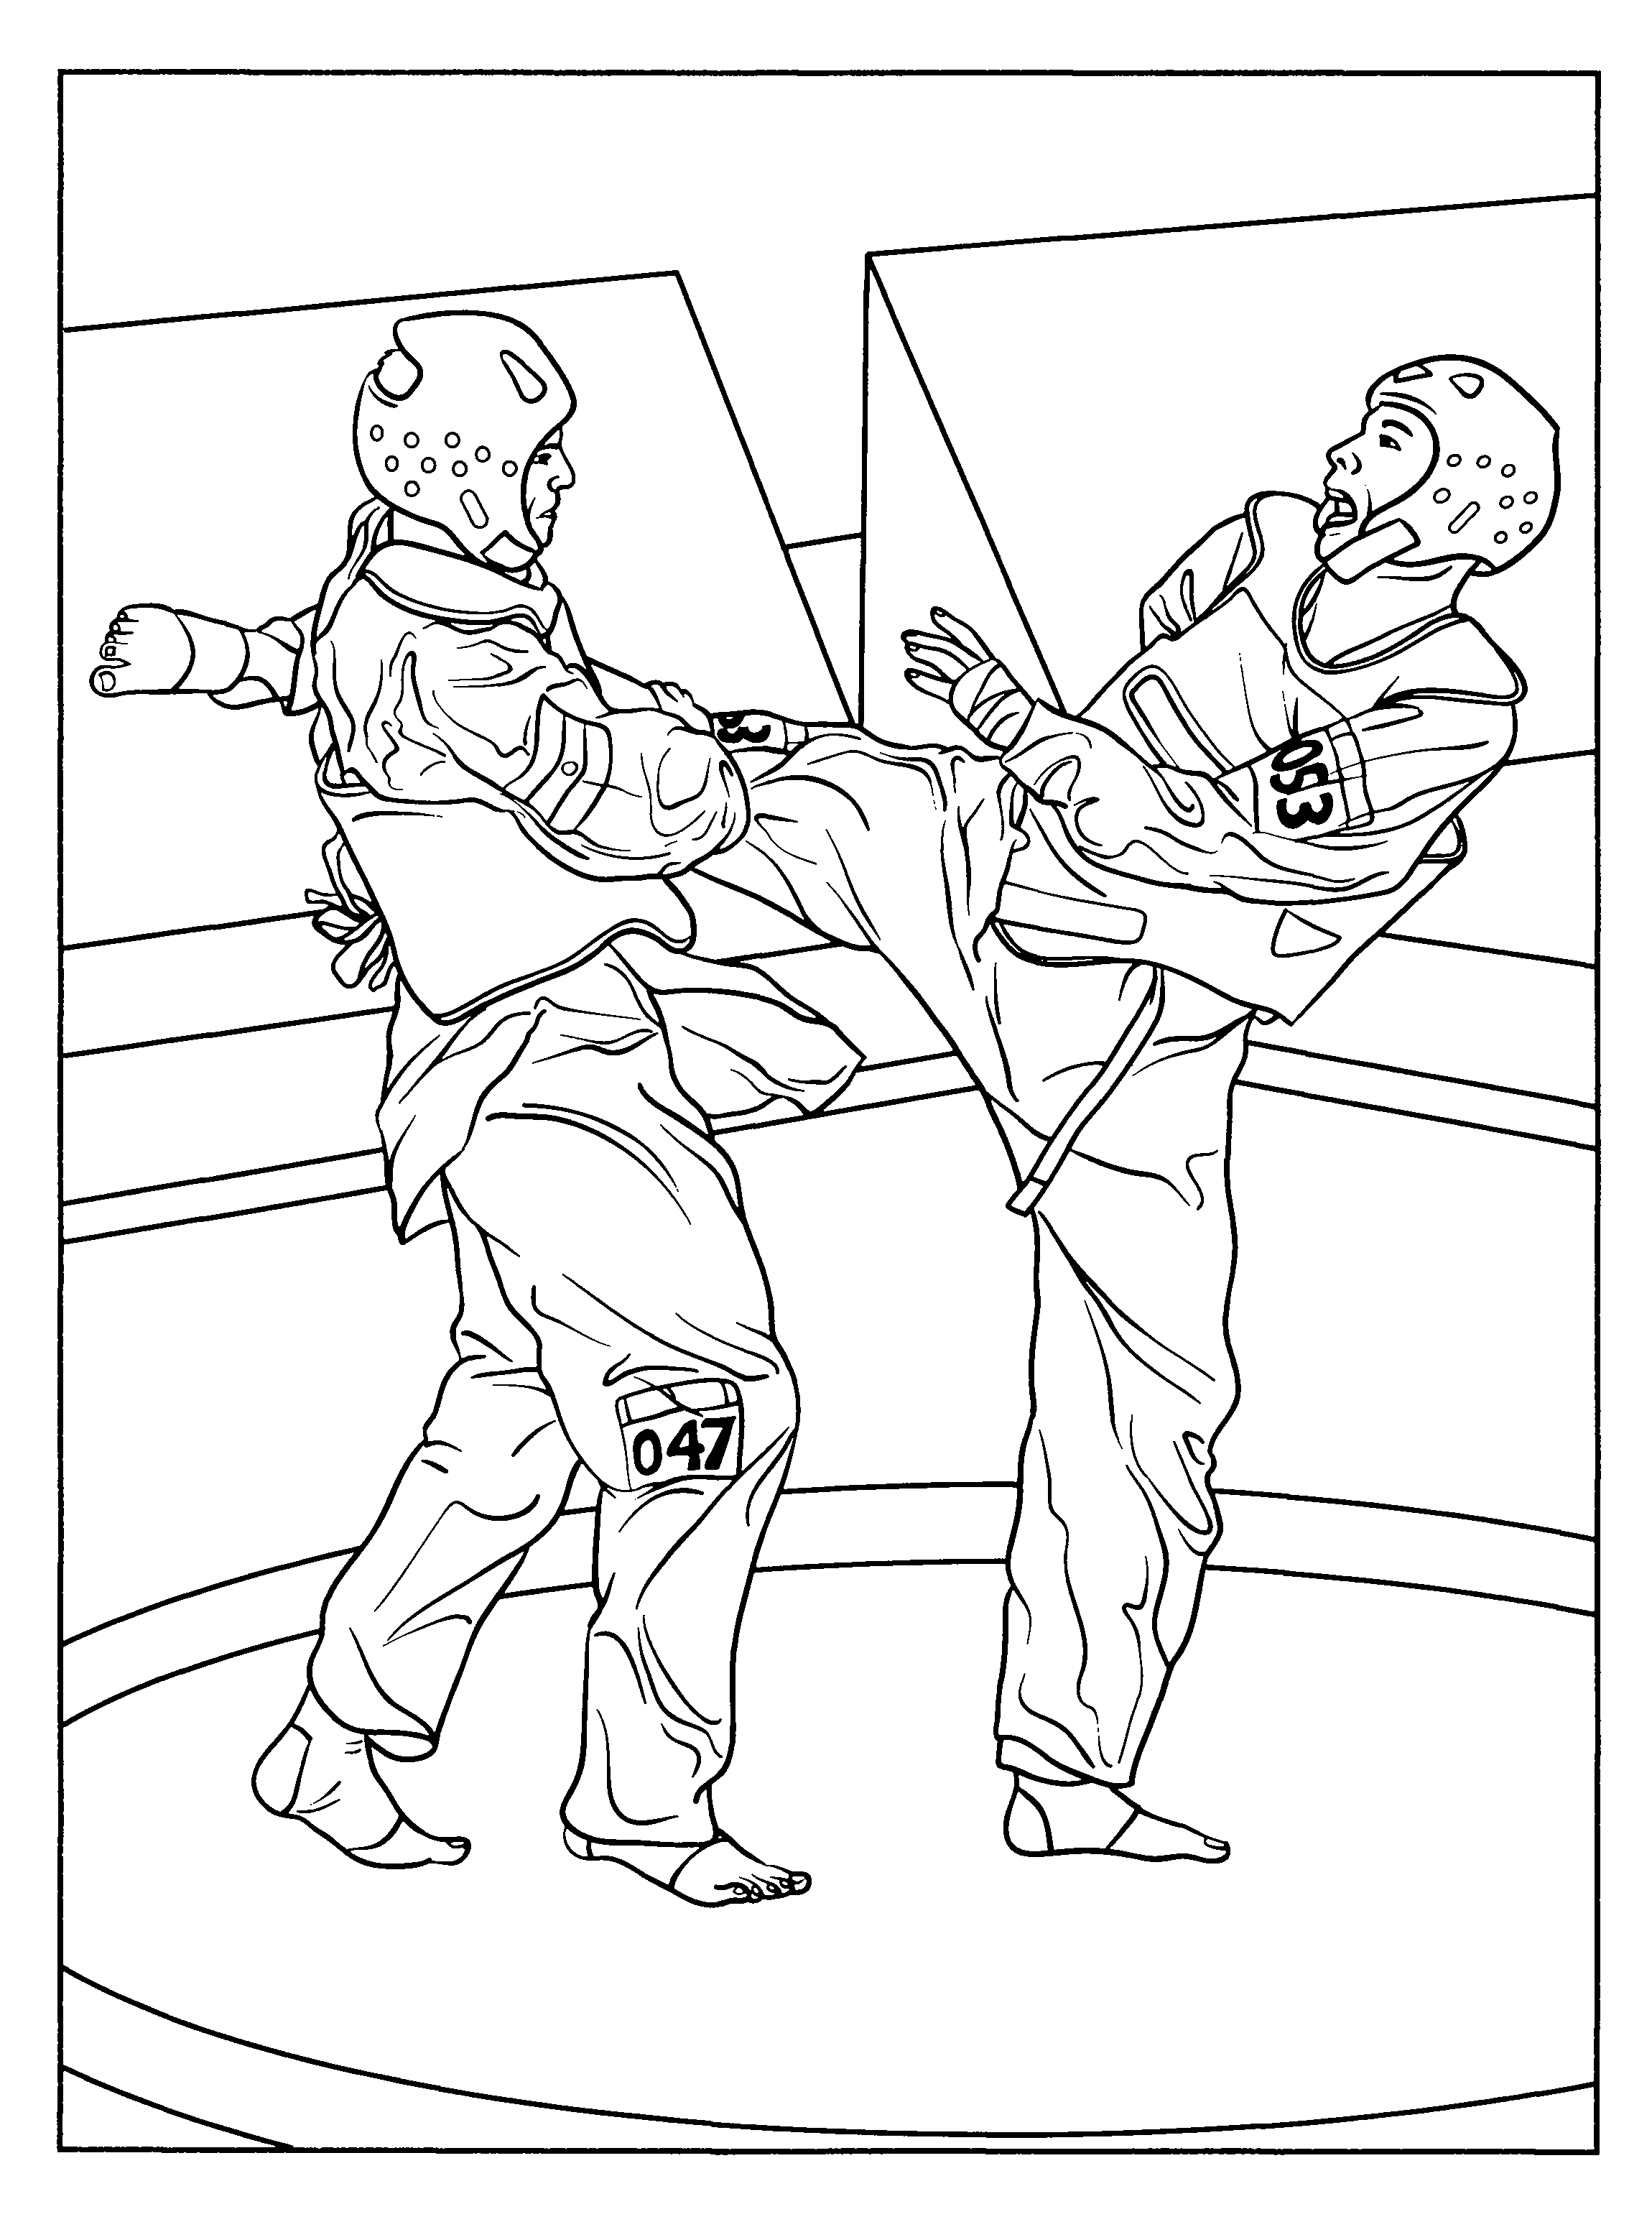 Karate Coloring Pages For Kids | Coloring Pages | Pinterest - Free Printable Karate Coloring Pages